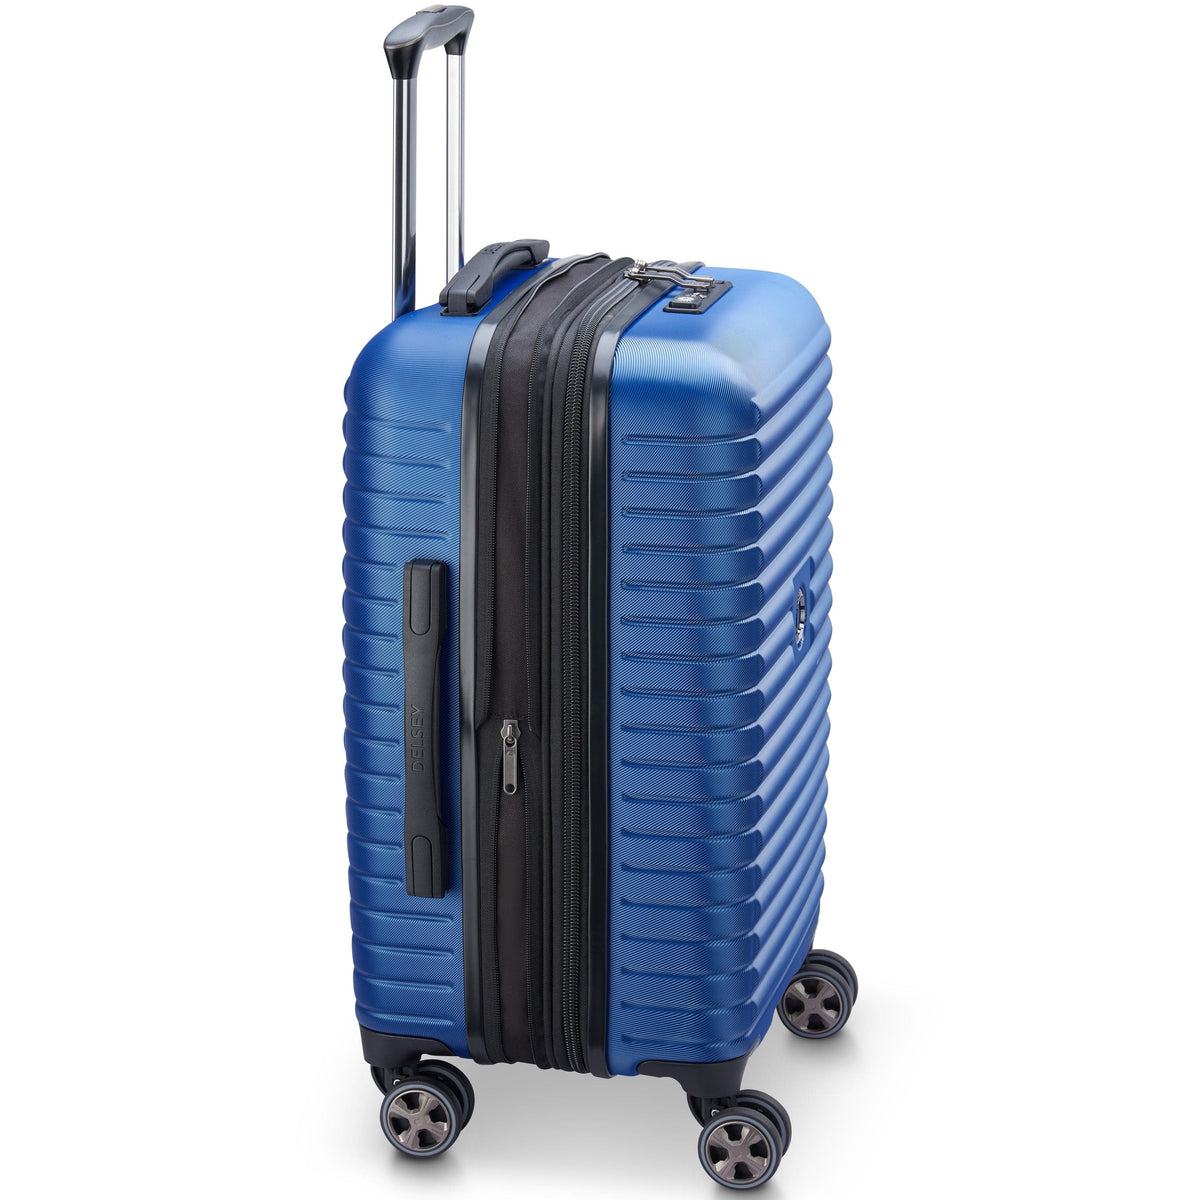 Delsey Cruise 3.0 Carry-On Expandable Spinner Luggage - 21" Small